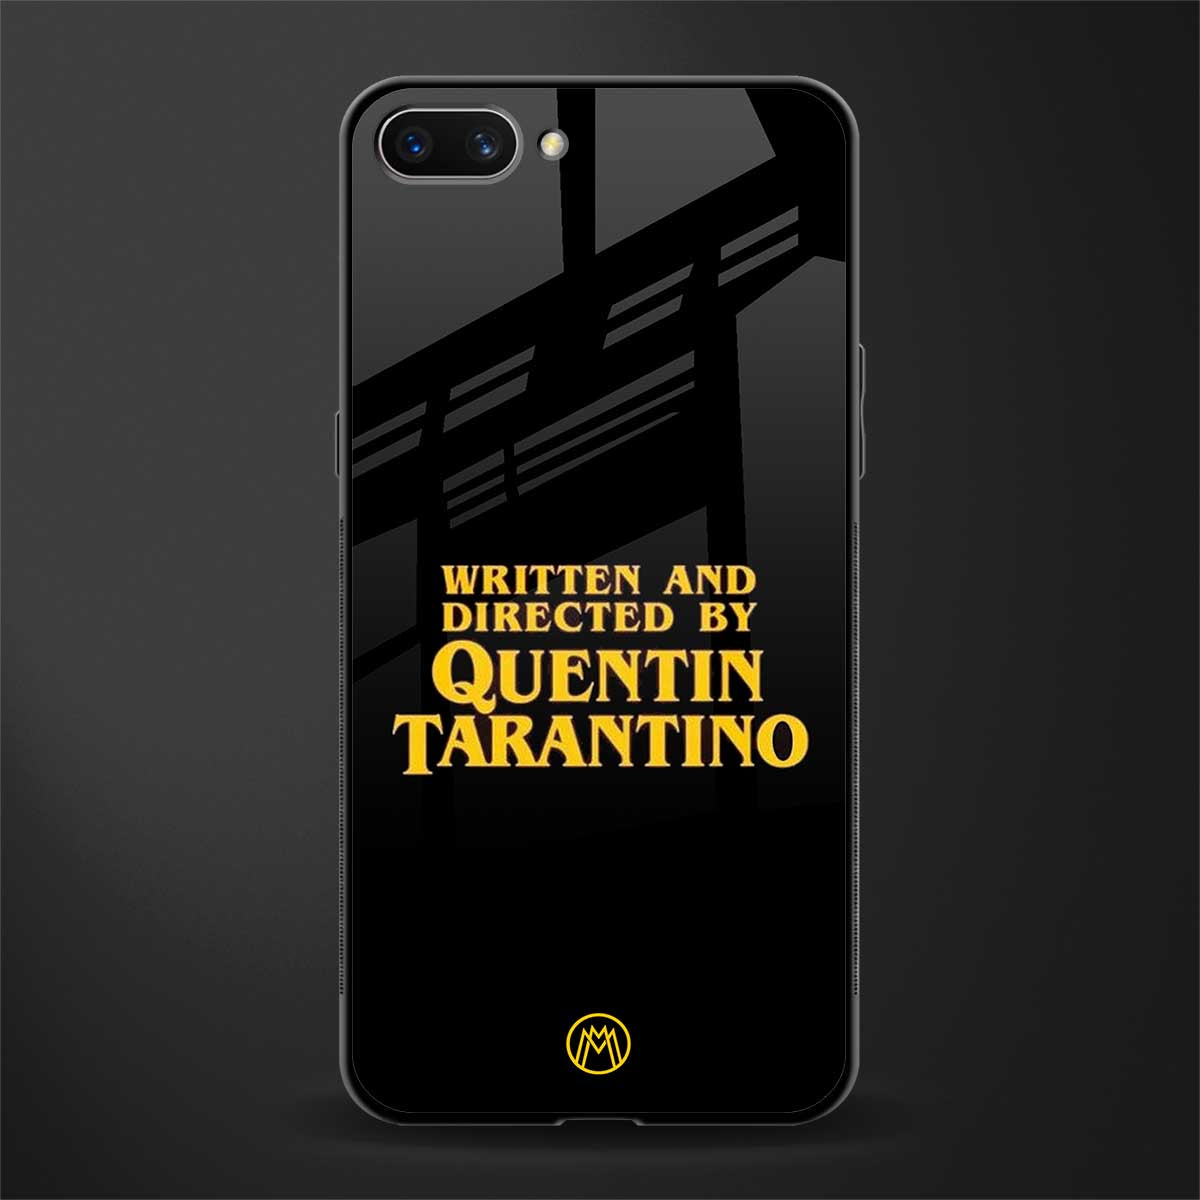 quentin tarantino glass case for oppo a3s image